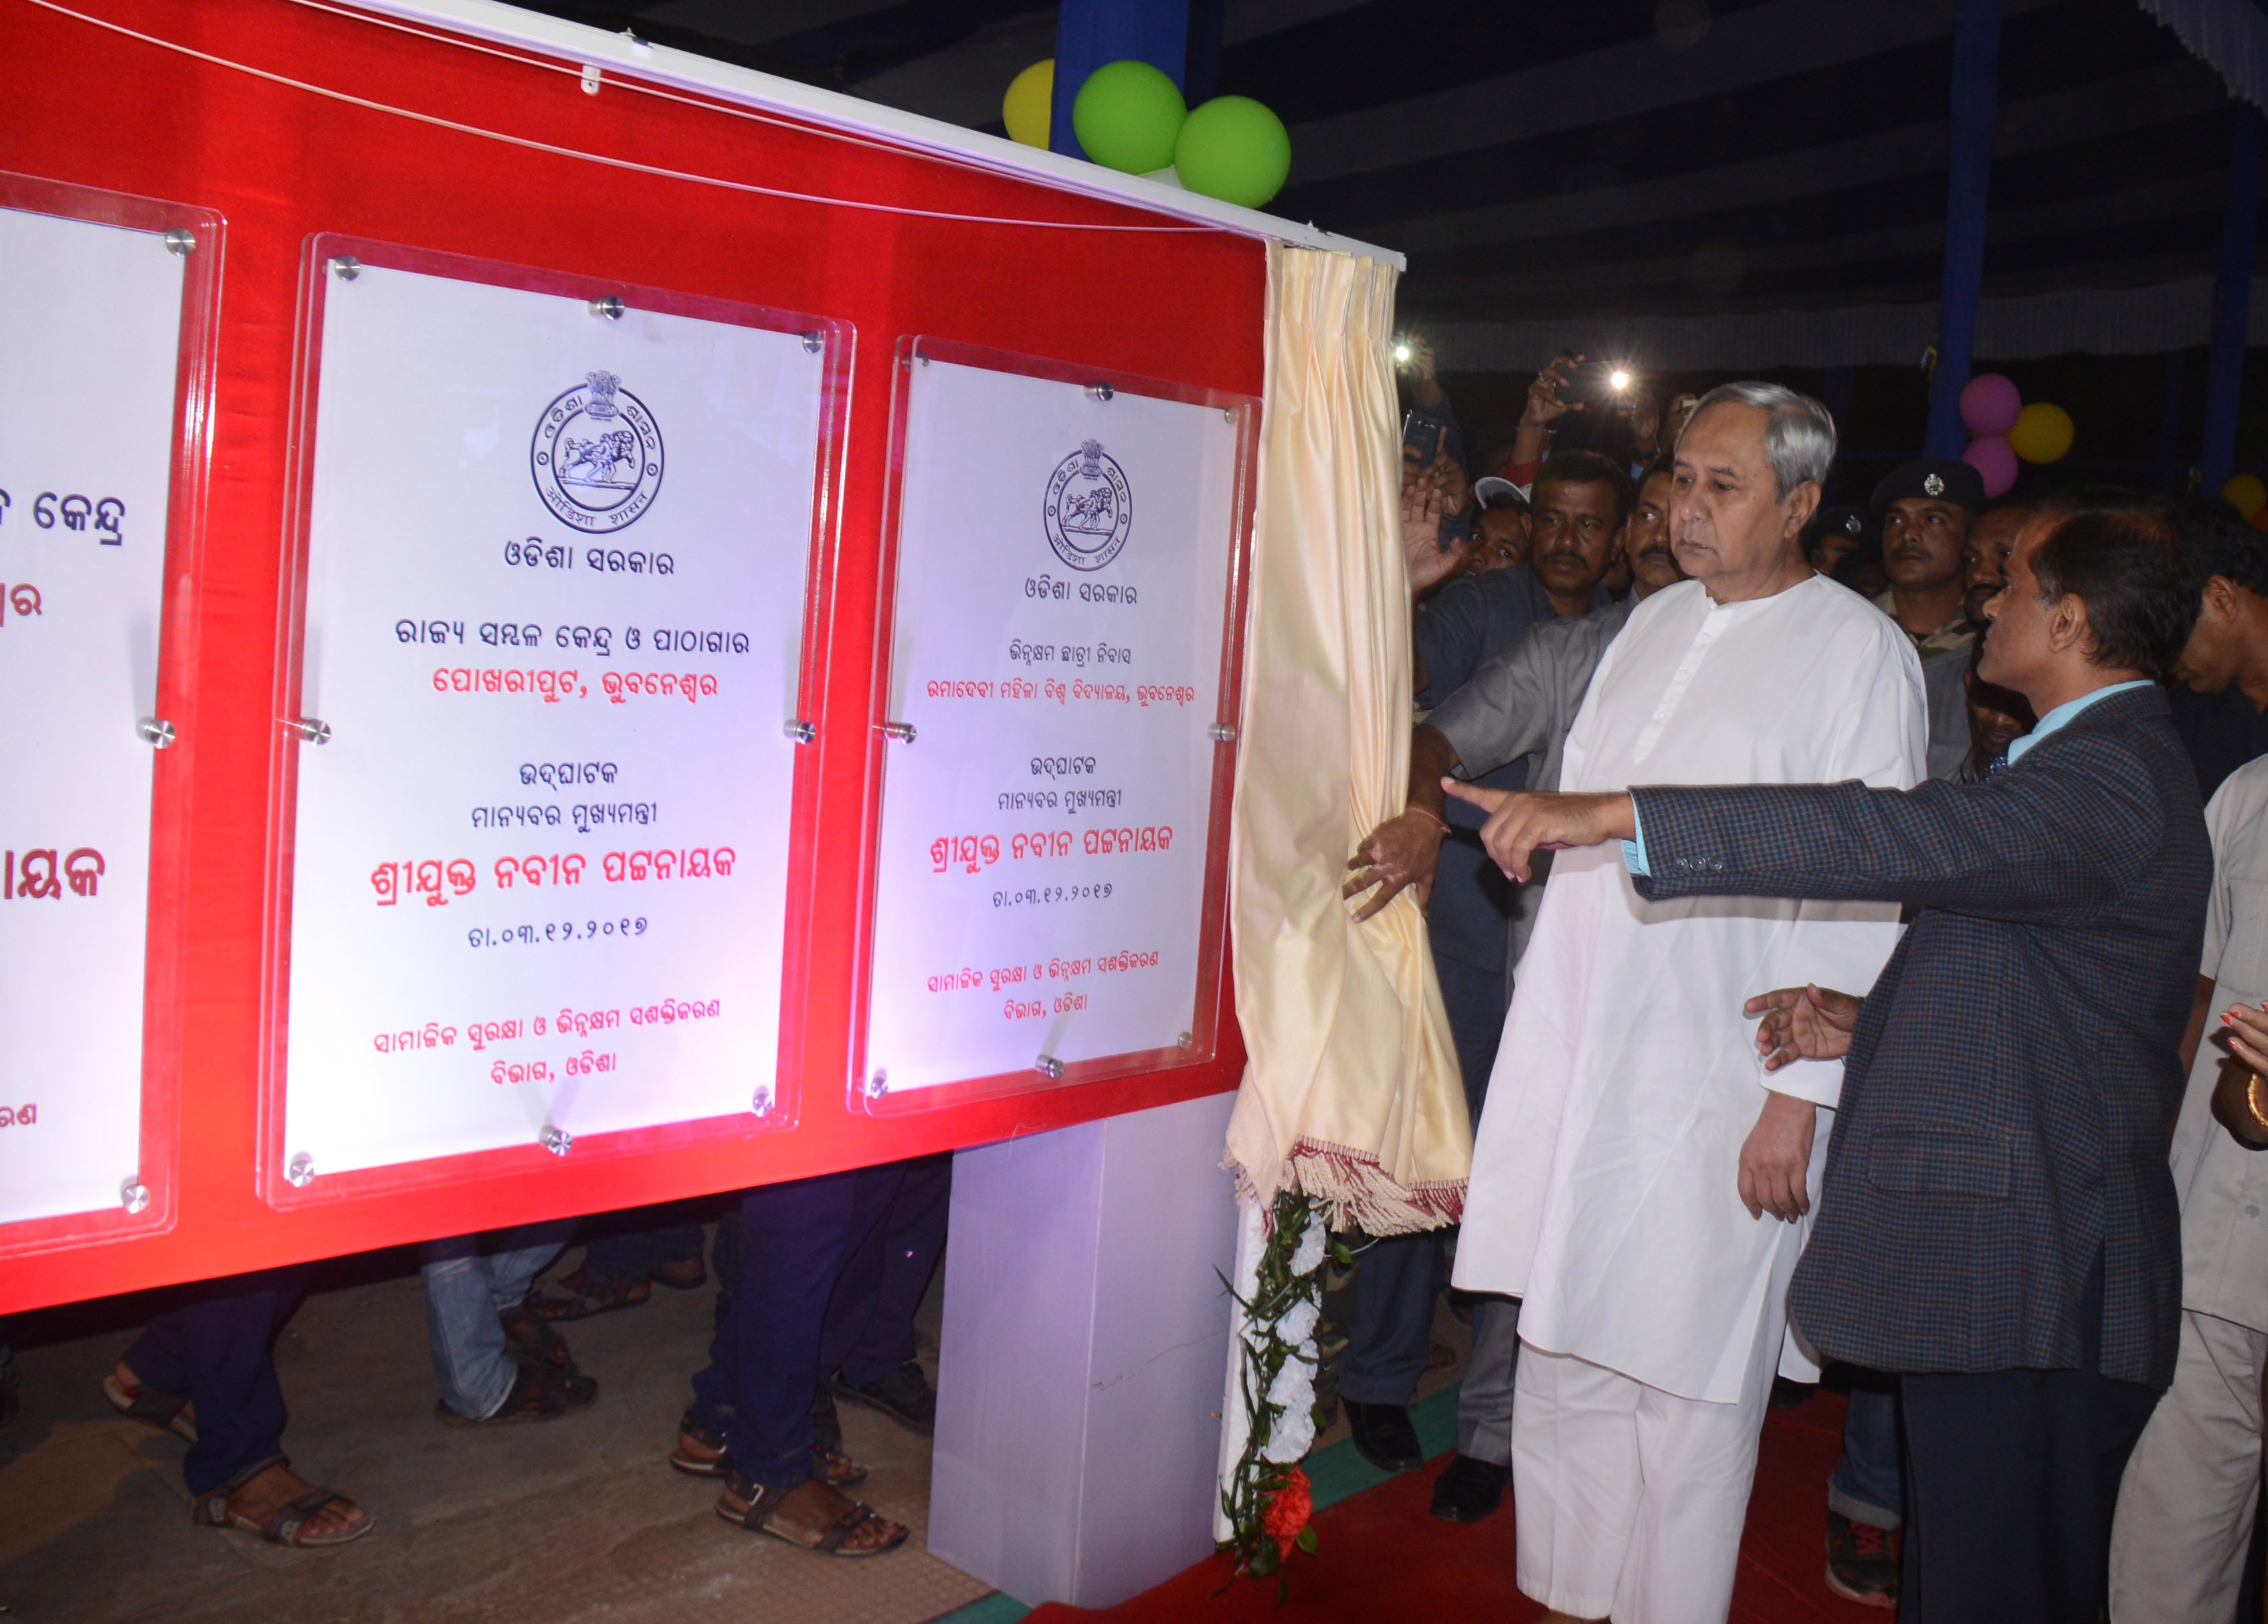 Chief Minister Naveen Patnaik inaugurating different facilities including a hostel for differently abled students at RD Women's University at Adivasi Exhibition Ground, Unit 1, in Bhubaneswar